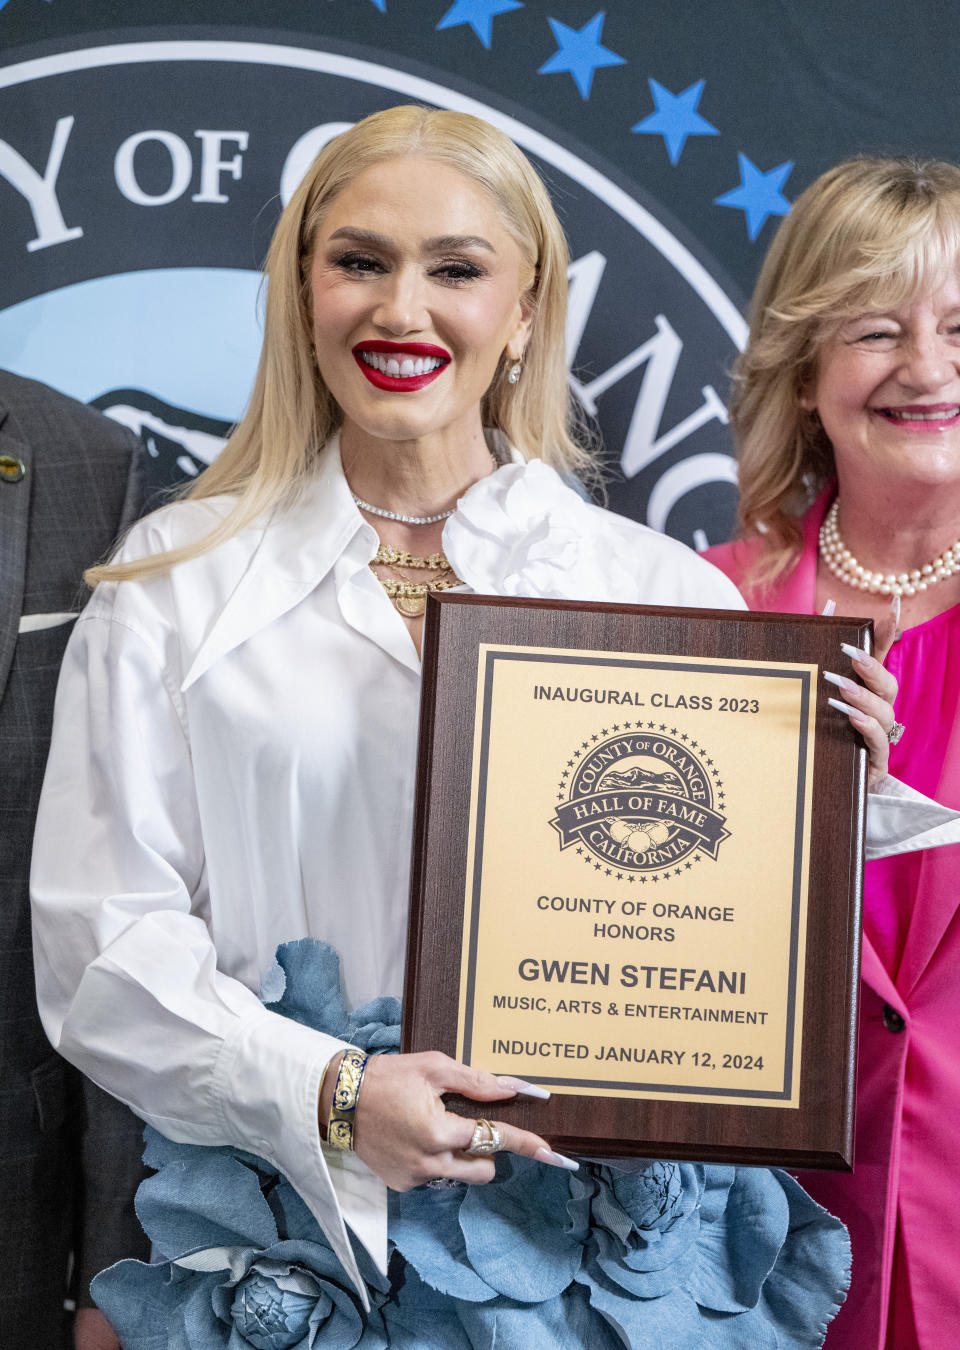 Gwen Stefani holding a plaque at the Orange County Music, Arts & Entertainment Hall of Fame 2023 event, smiling, with two individuals partly visible behind her